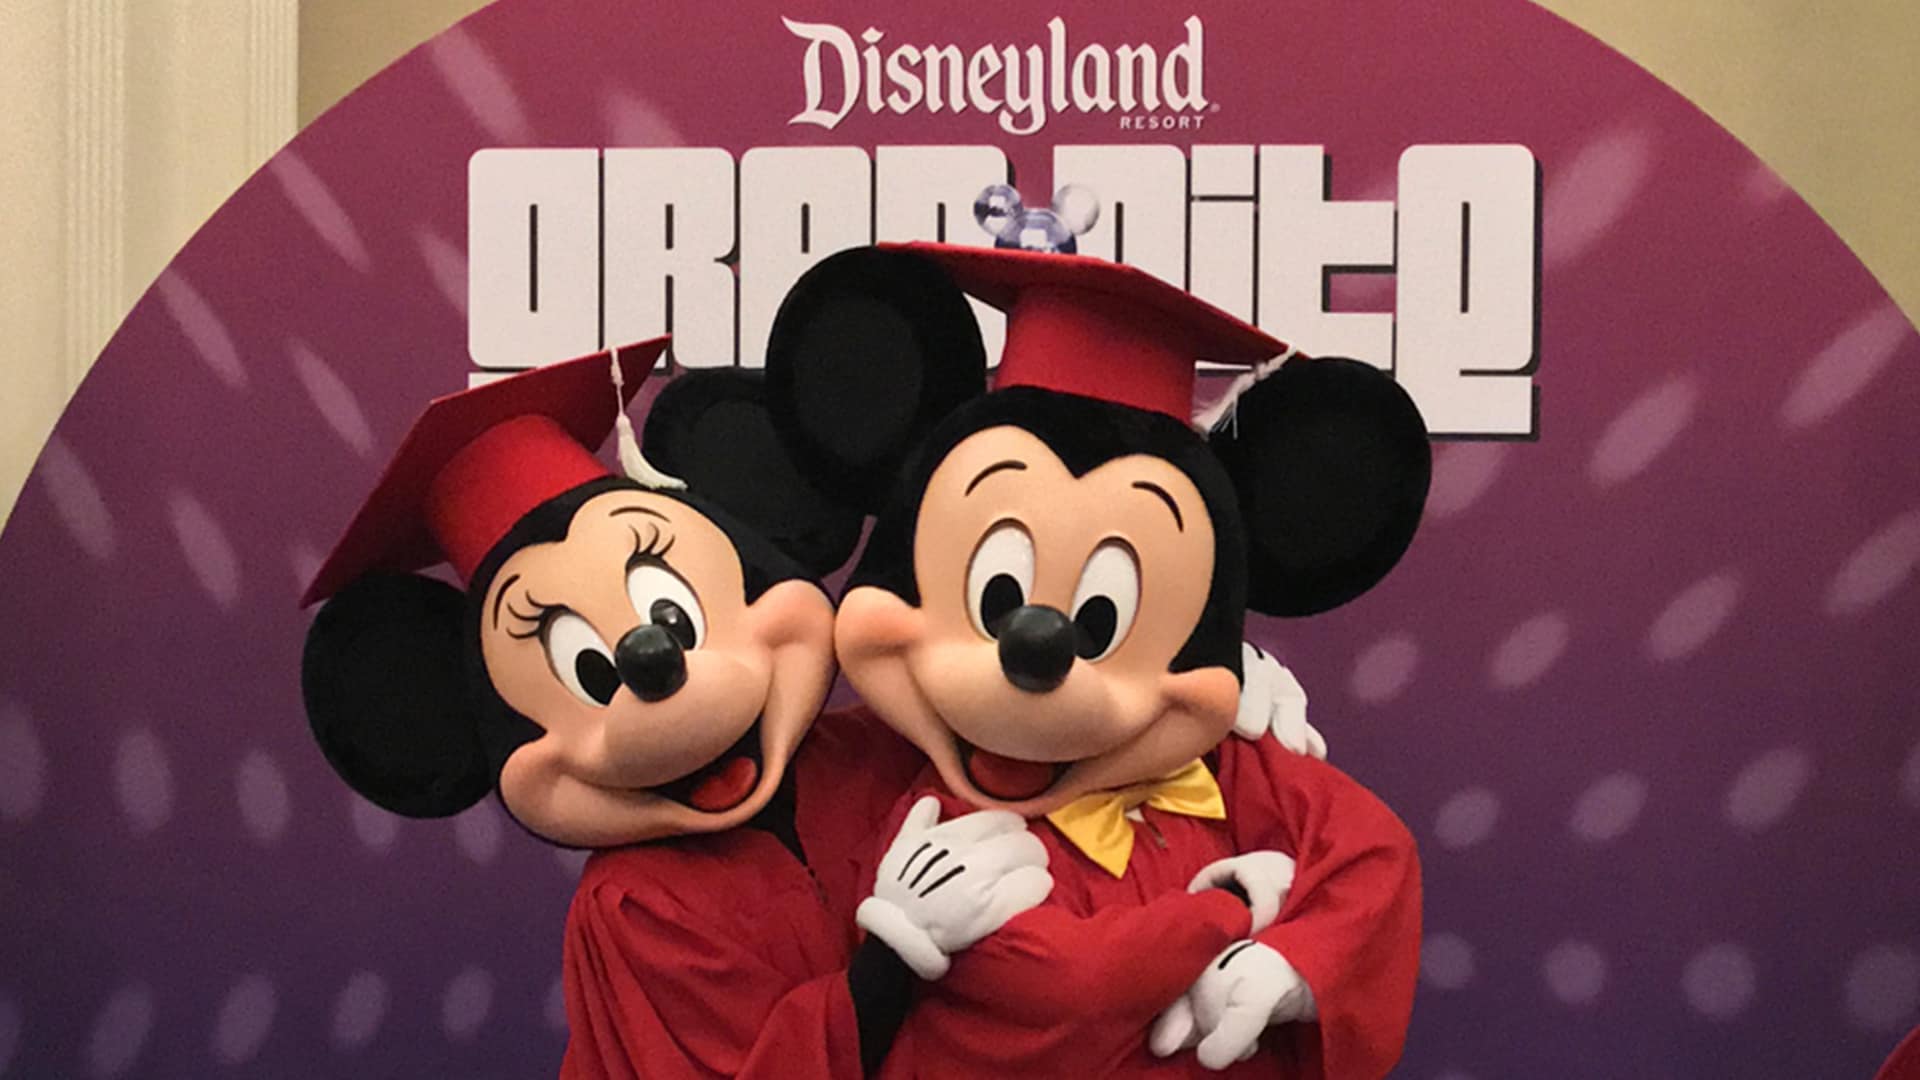 Micky and Minnie mouse dressed in graduation gowns at grad nite